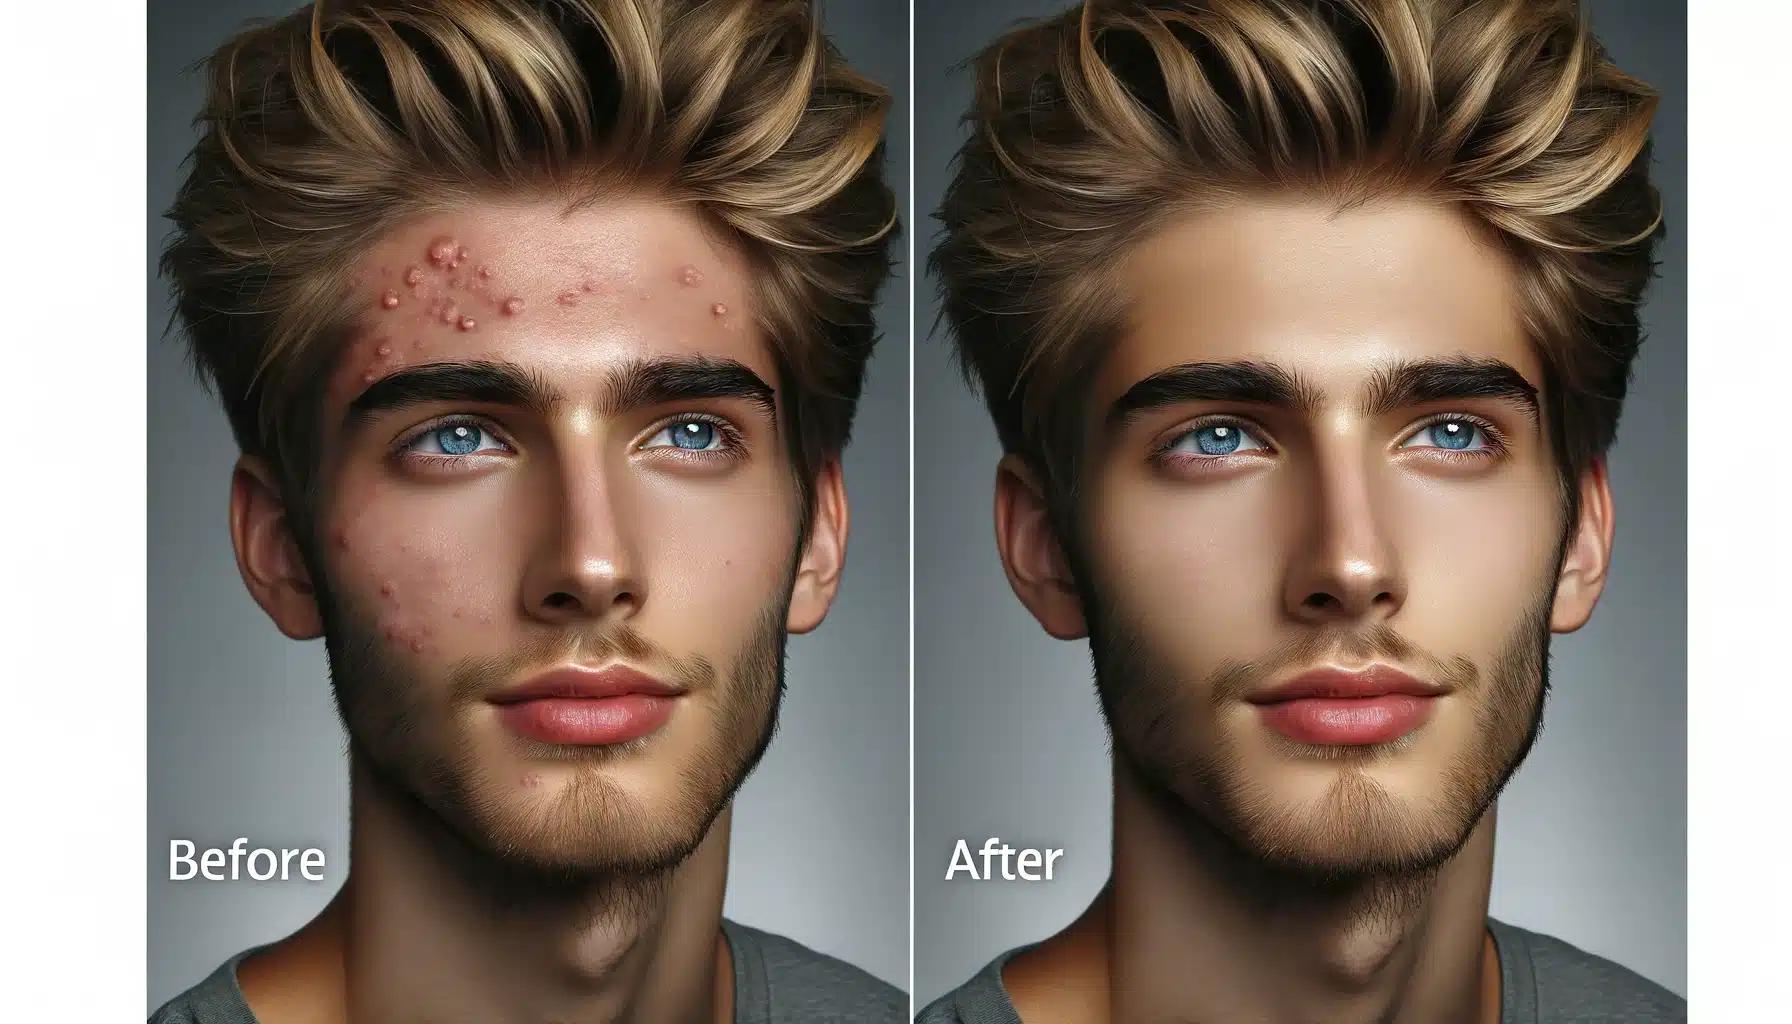 Before and after comparison of a male depiction, showing clear dermis and reduced imperfections.